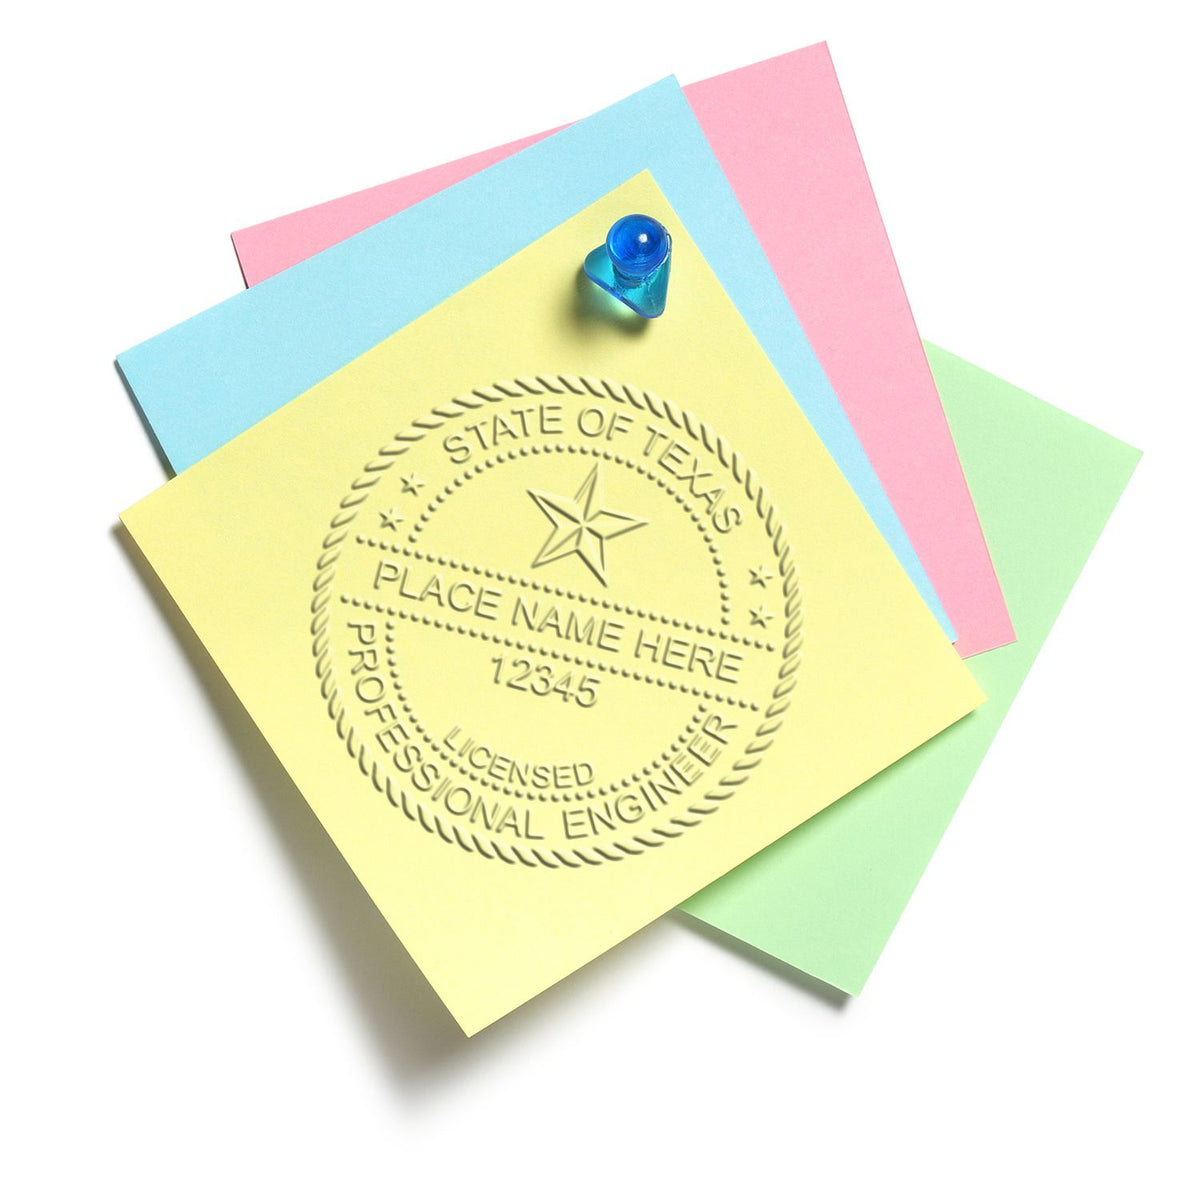 This paper is stamped with a sample imprint of the Texas Engineer Desk Seal, signifying its quality and reliability.